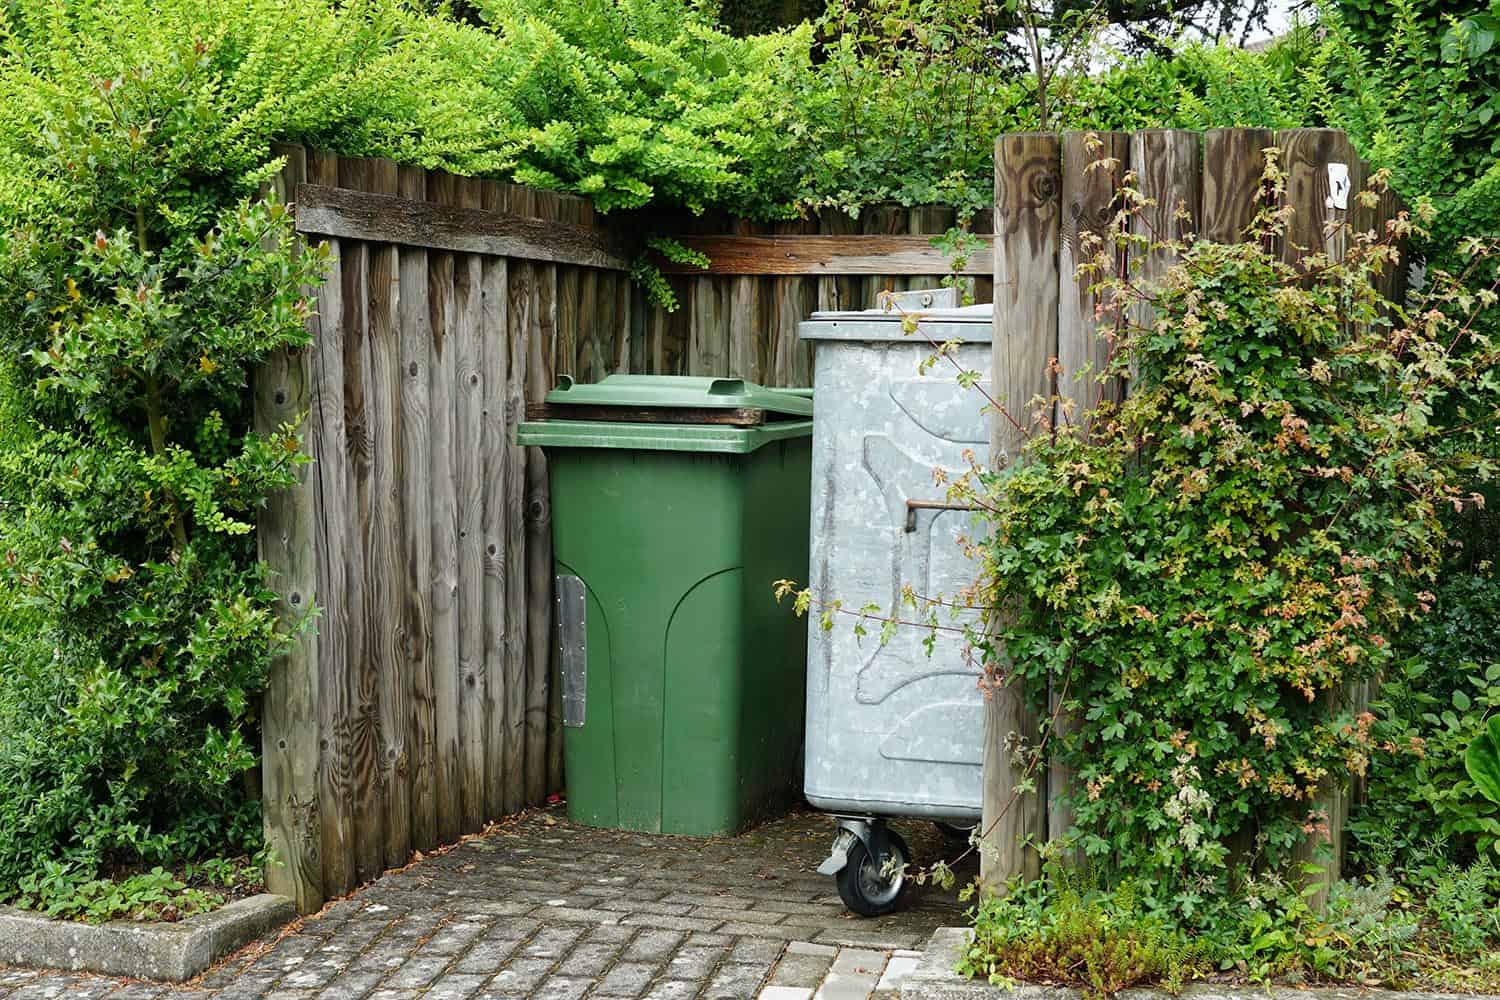 Metal container for house waste and plastic container for organic waste in a wooden niche surrounded by lush vegetation